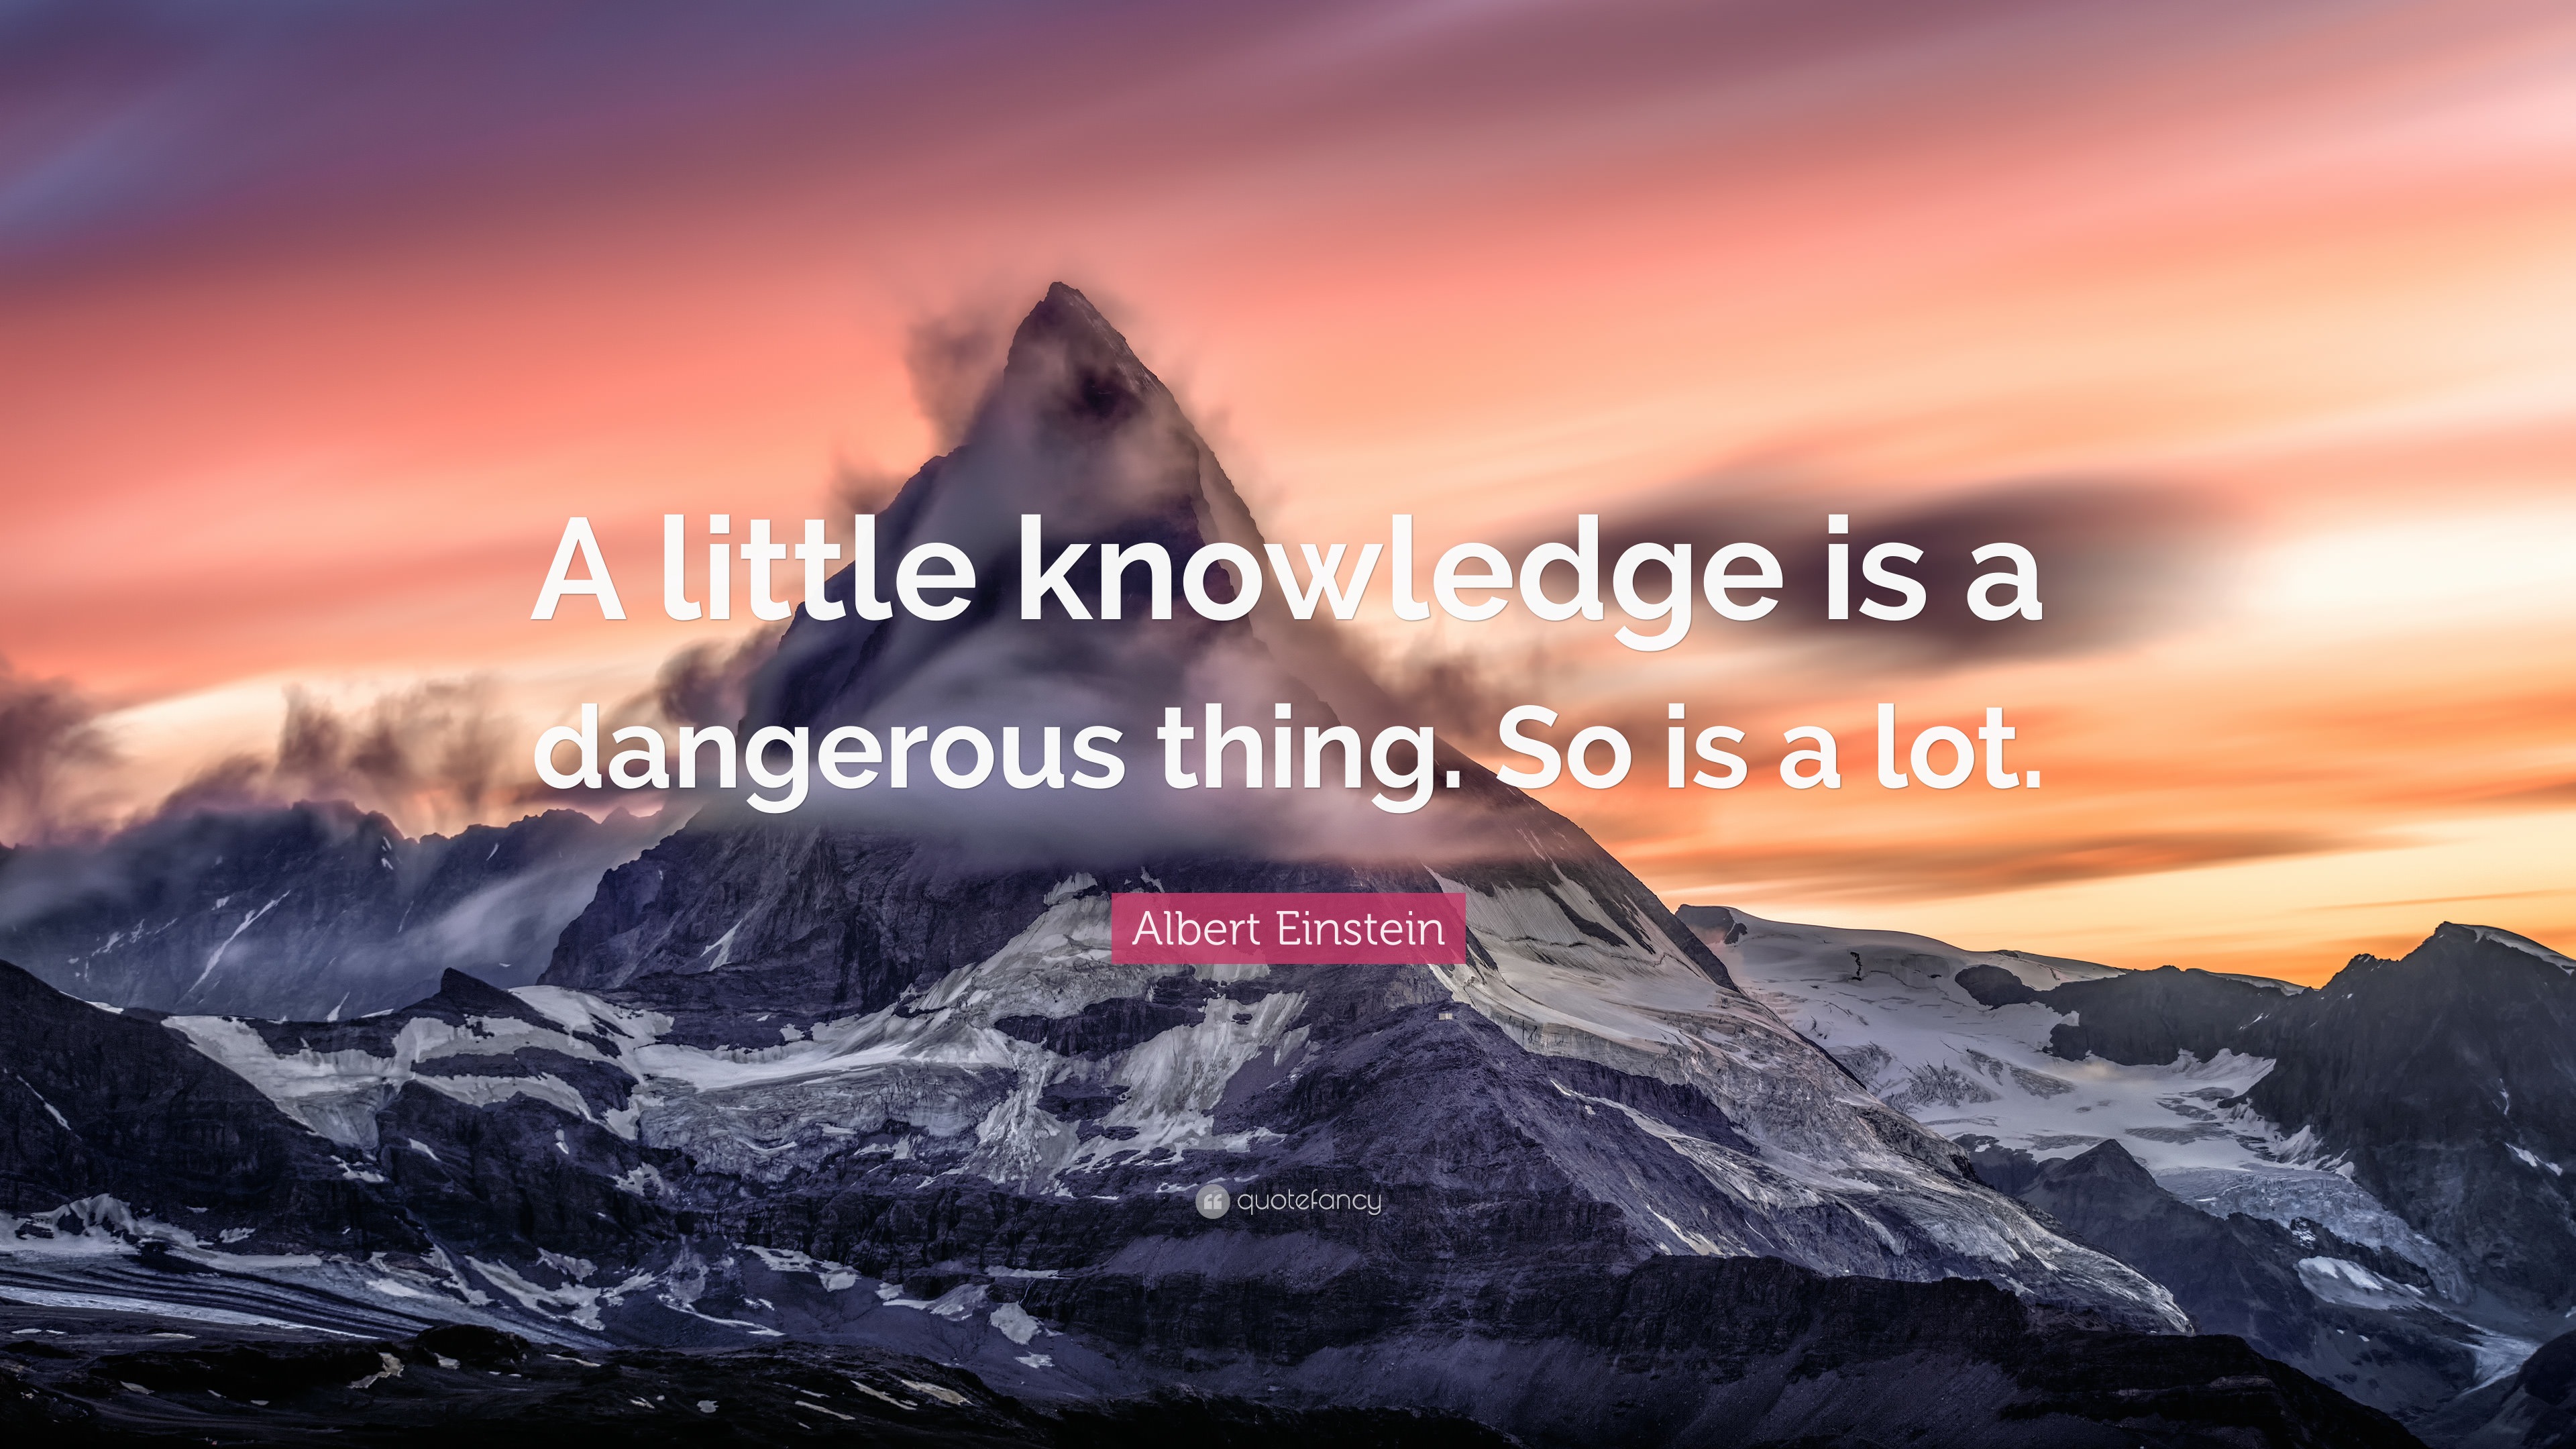 Albert Einstein Quote: “A little knowledge is a dangerous thing. So is ...